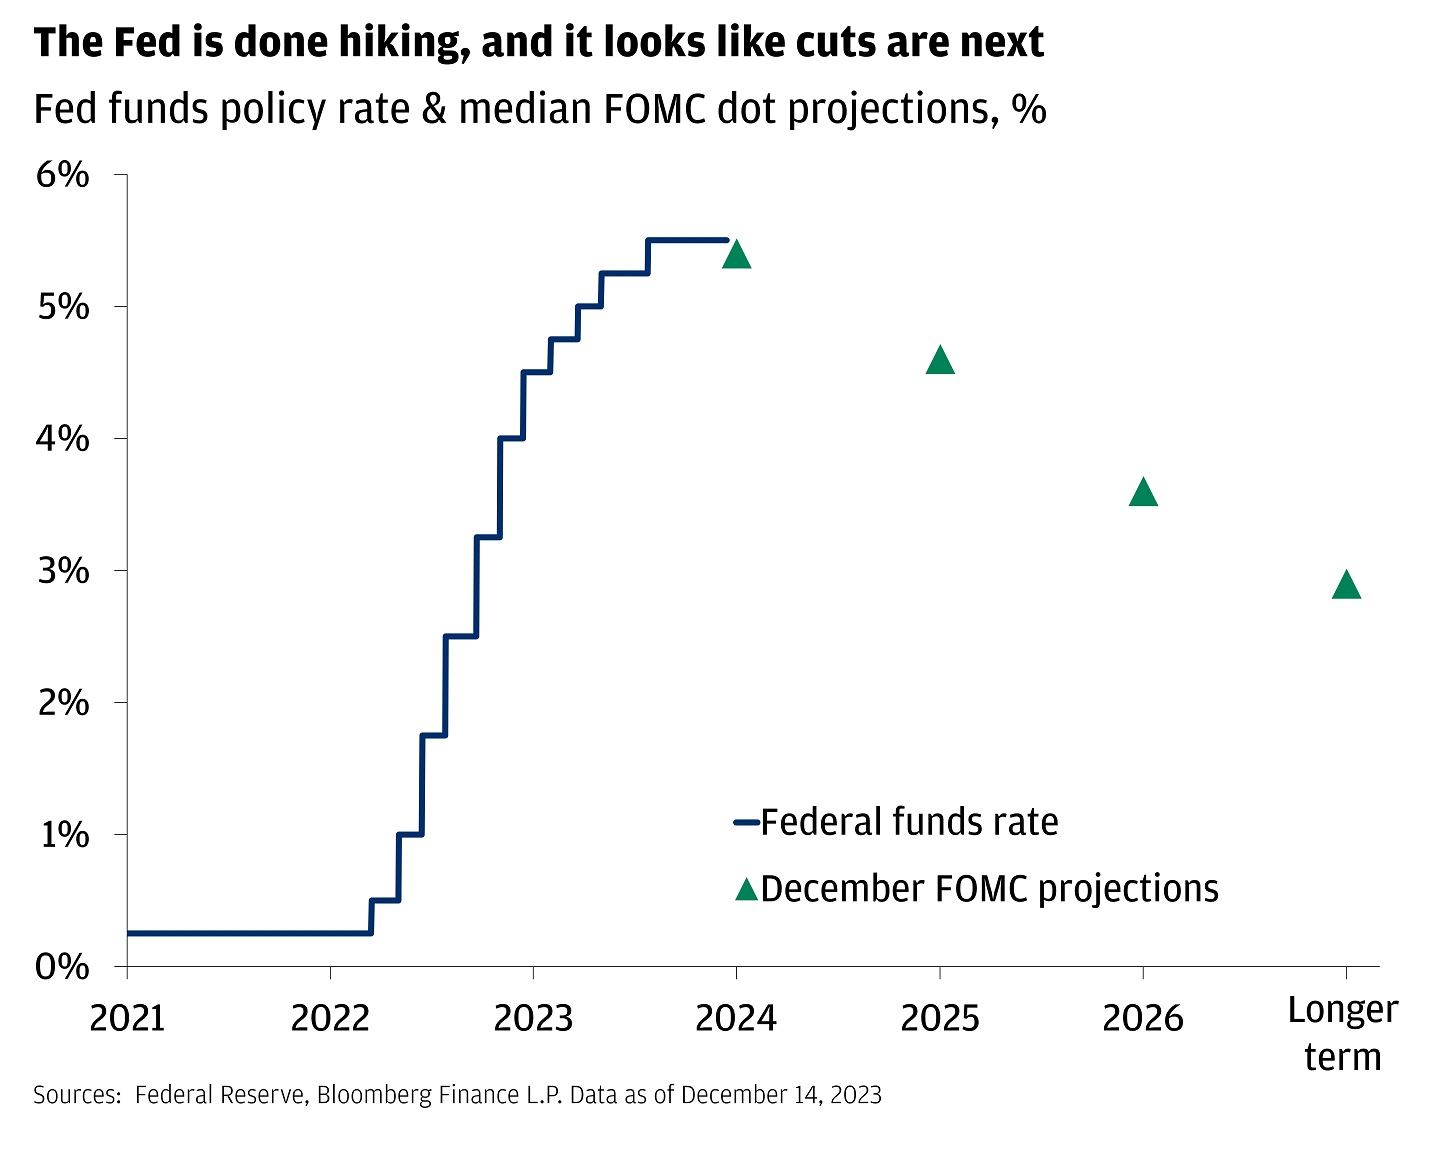 Line chart showing the Fed funds policy rate and the median FOMC dot projections since January 2021.